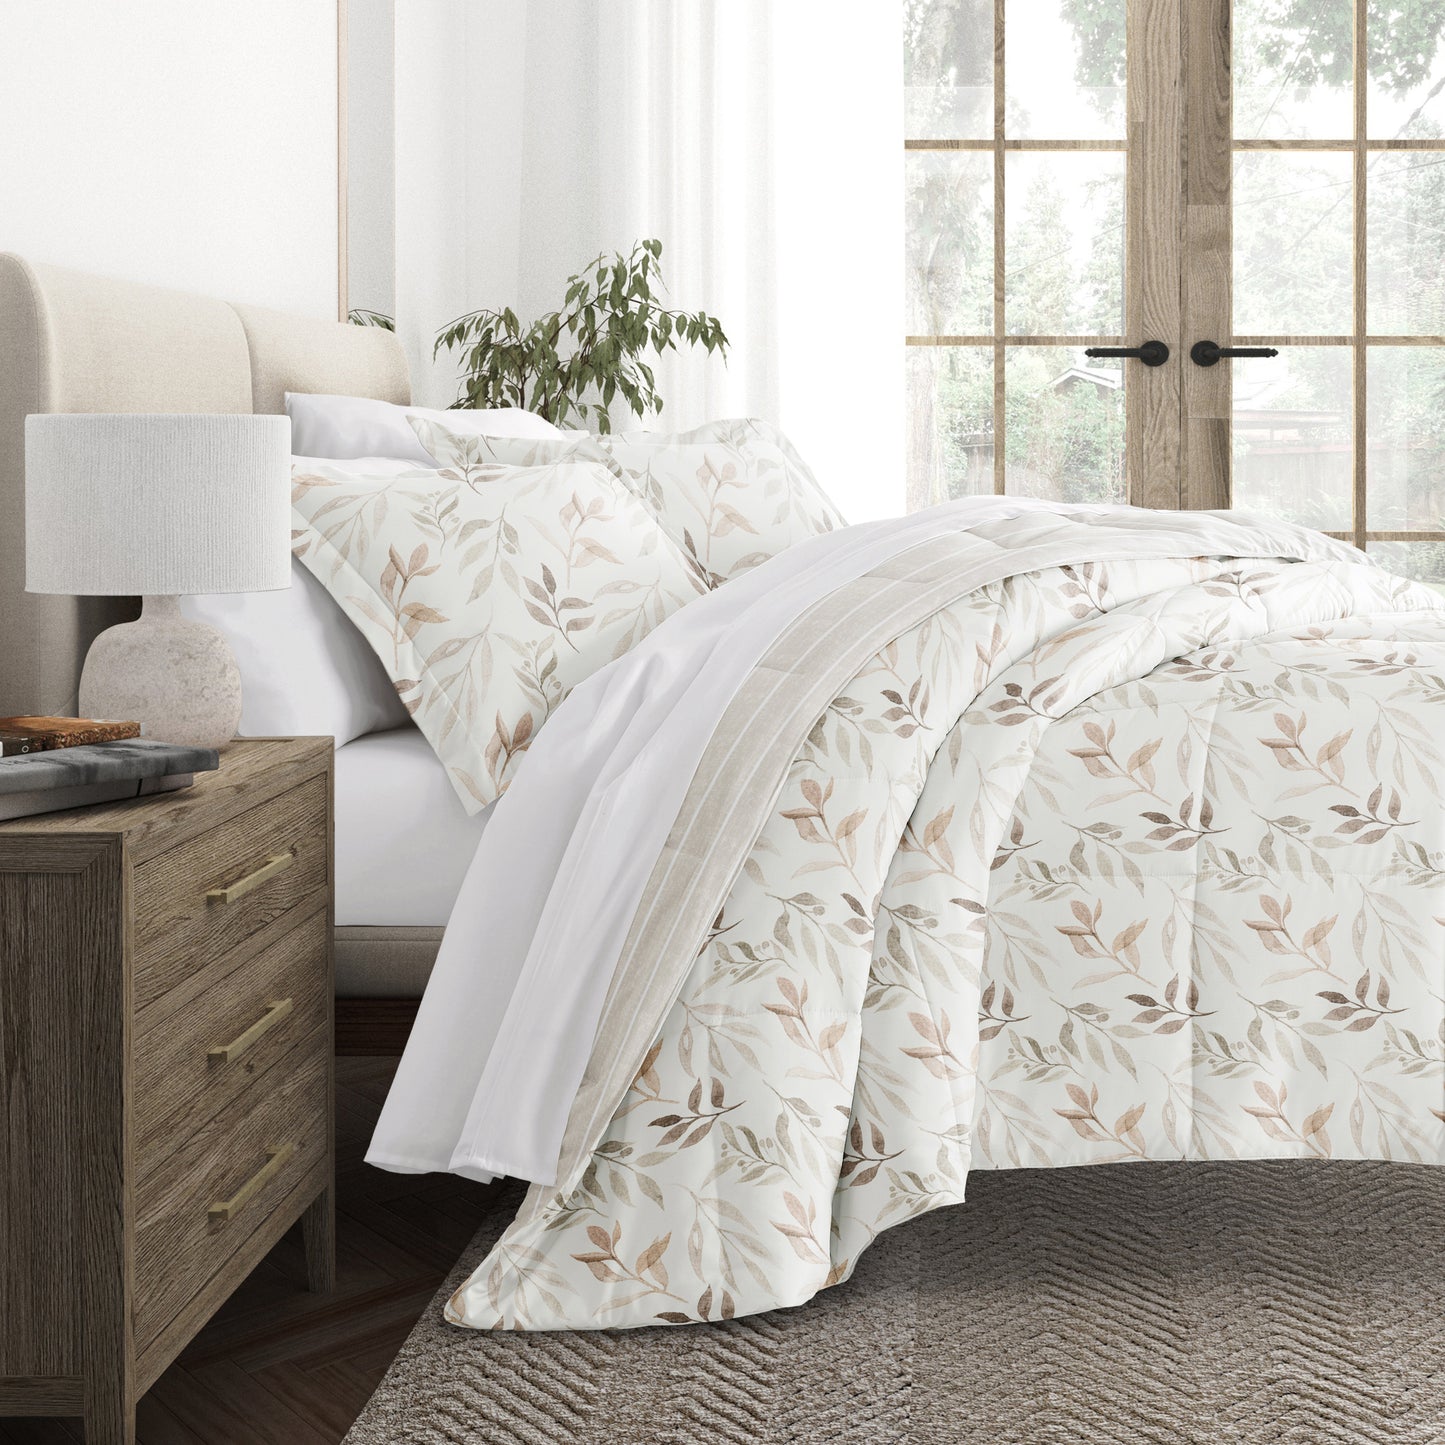 Comforter Sets in Two Reversible Patterns